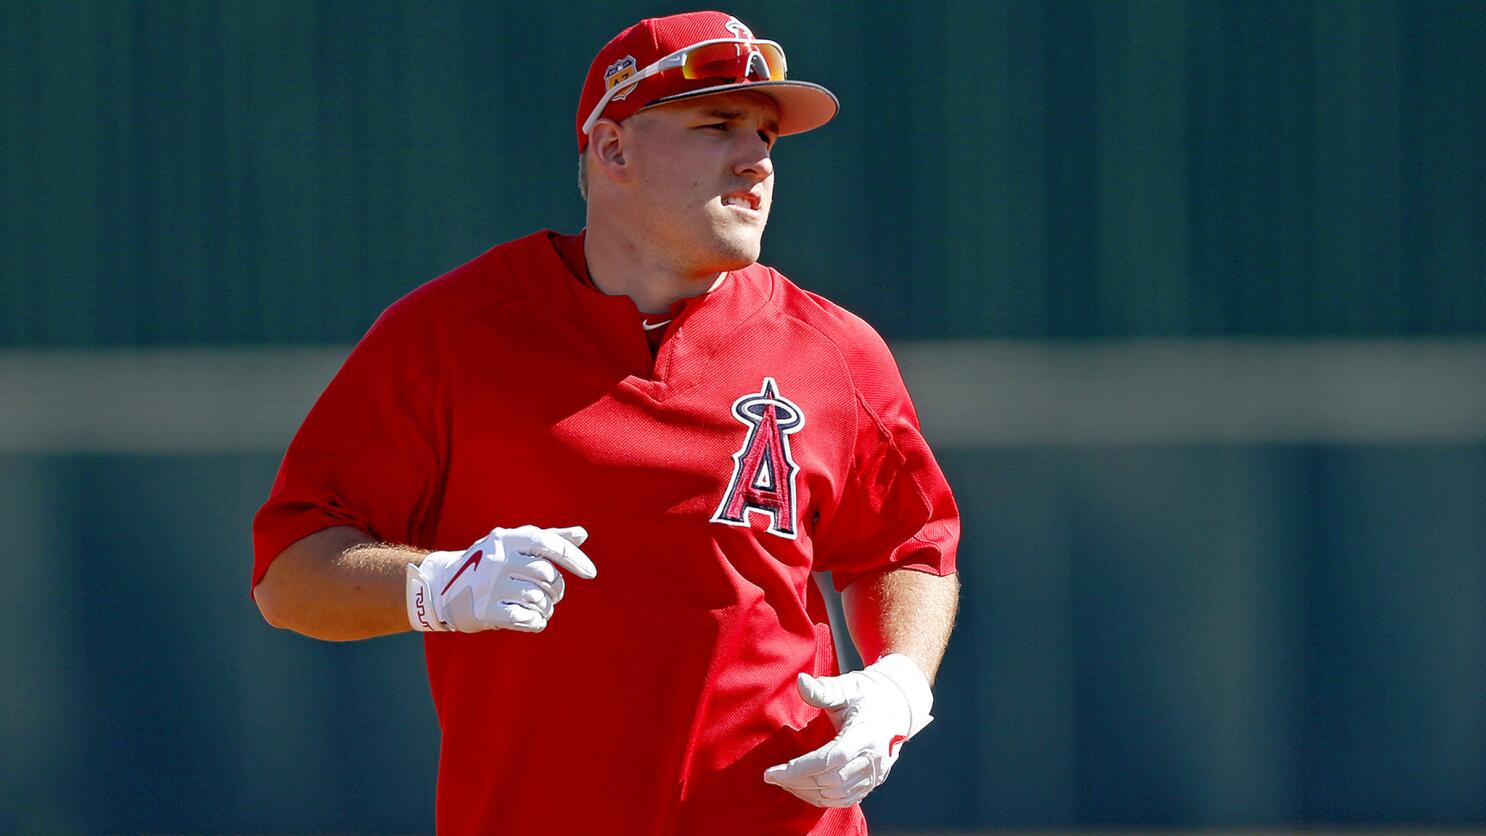 Five-time All-Star Mike Trout's goal: 'I want to be the best player there  is' - Los Angeles Times